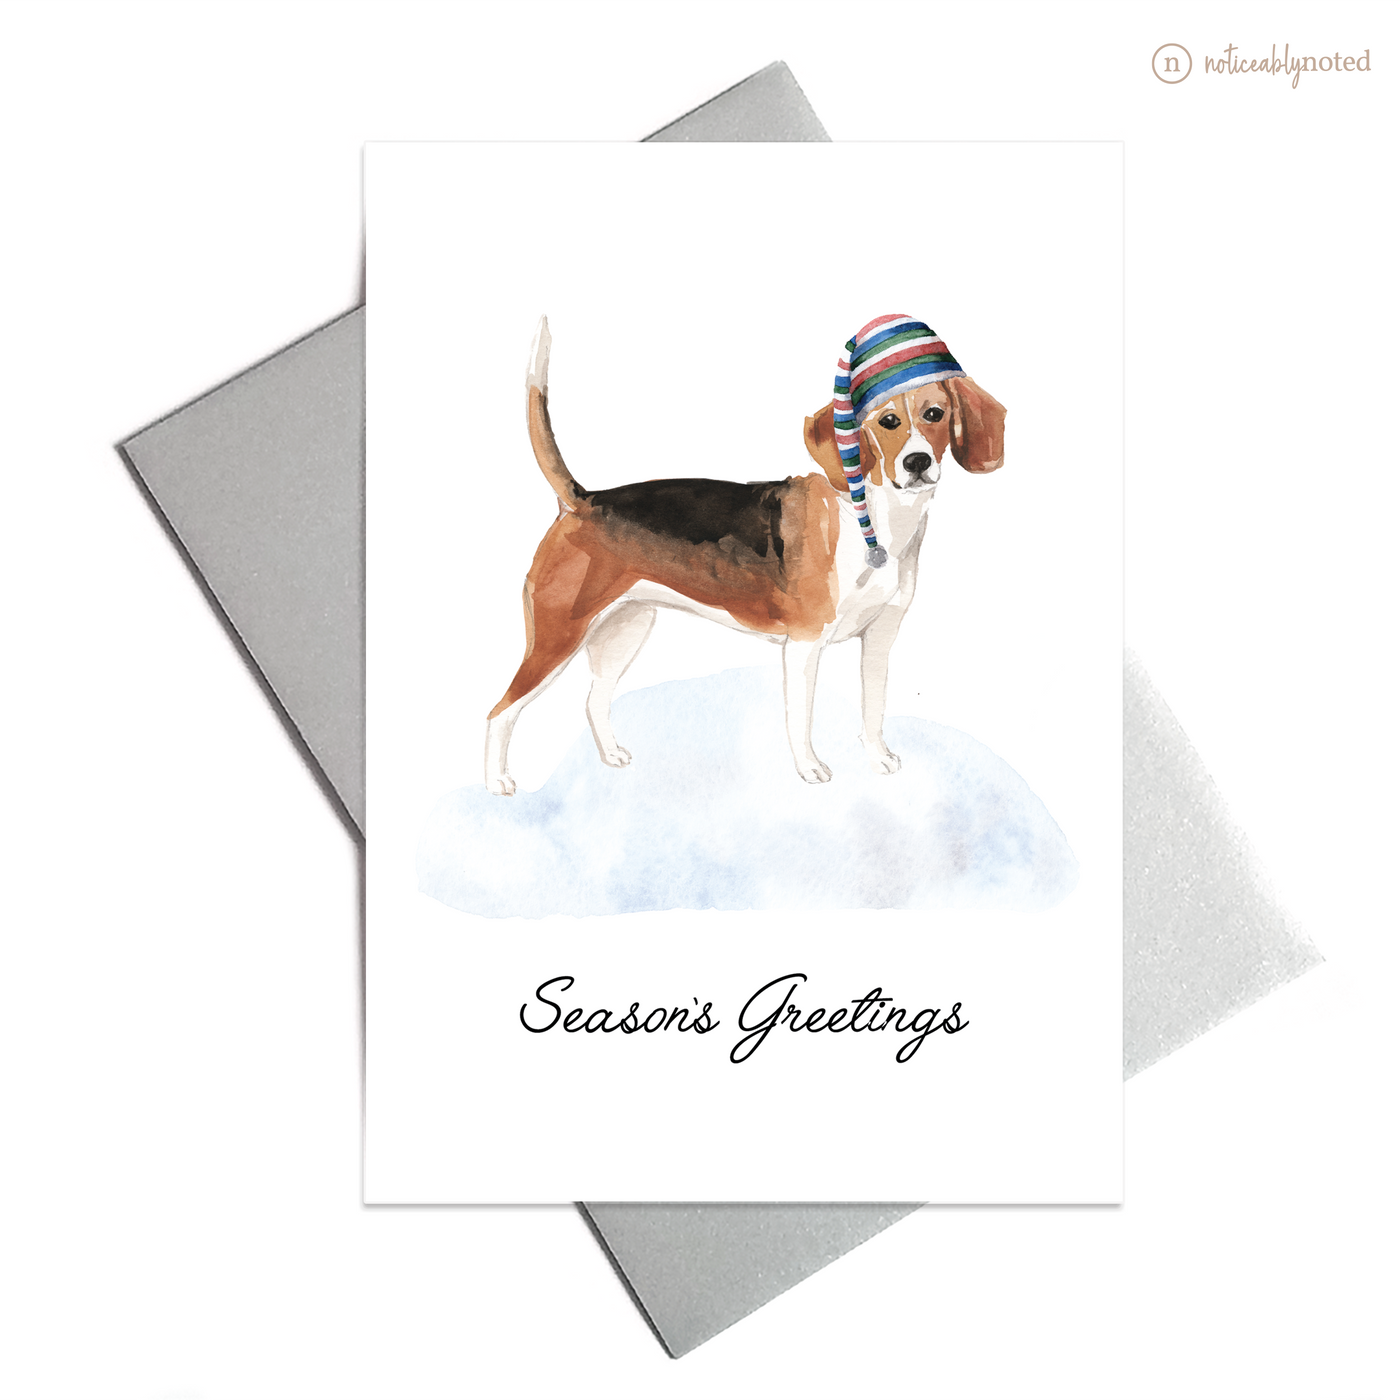 Beagle Dog Holiday Card | Noticeably Noted